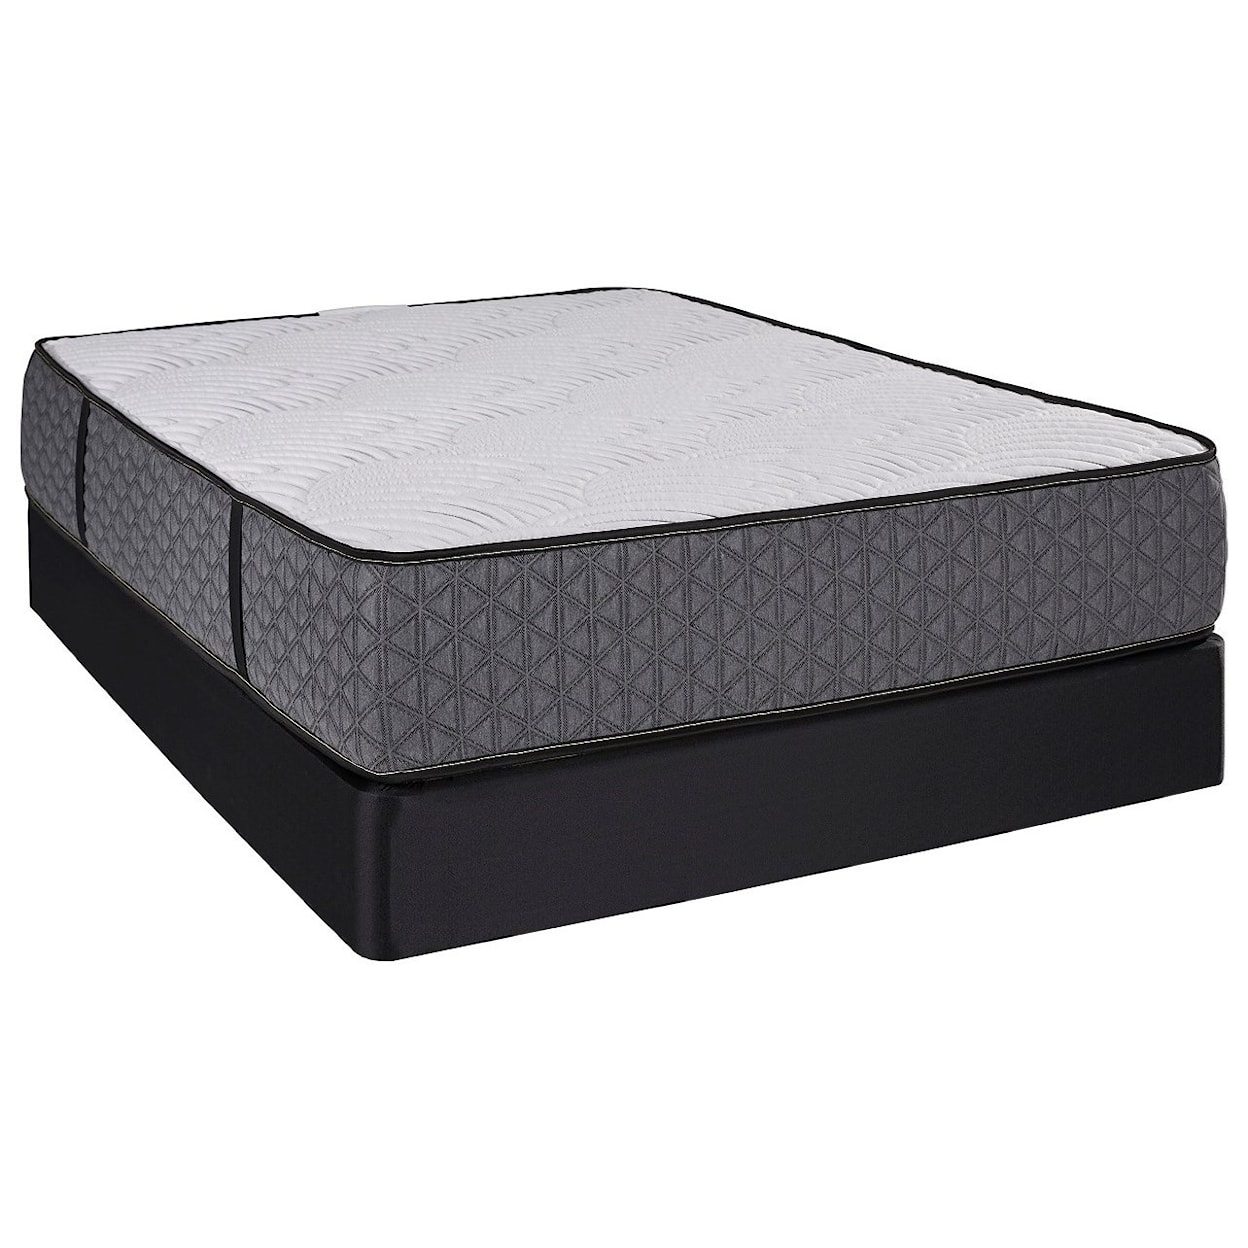 Restonic Aphrodite Firm Twin Pocketed Coil Mattress Set